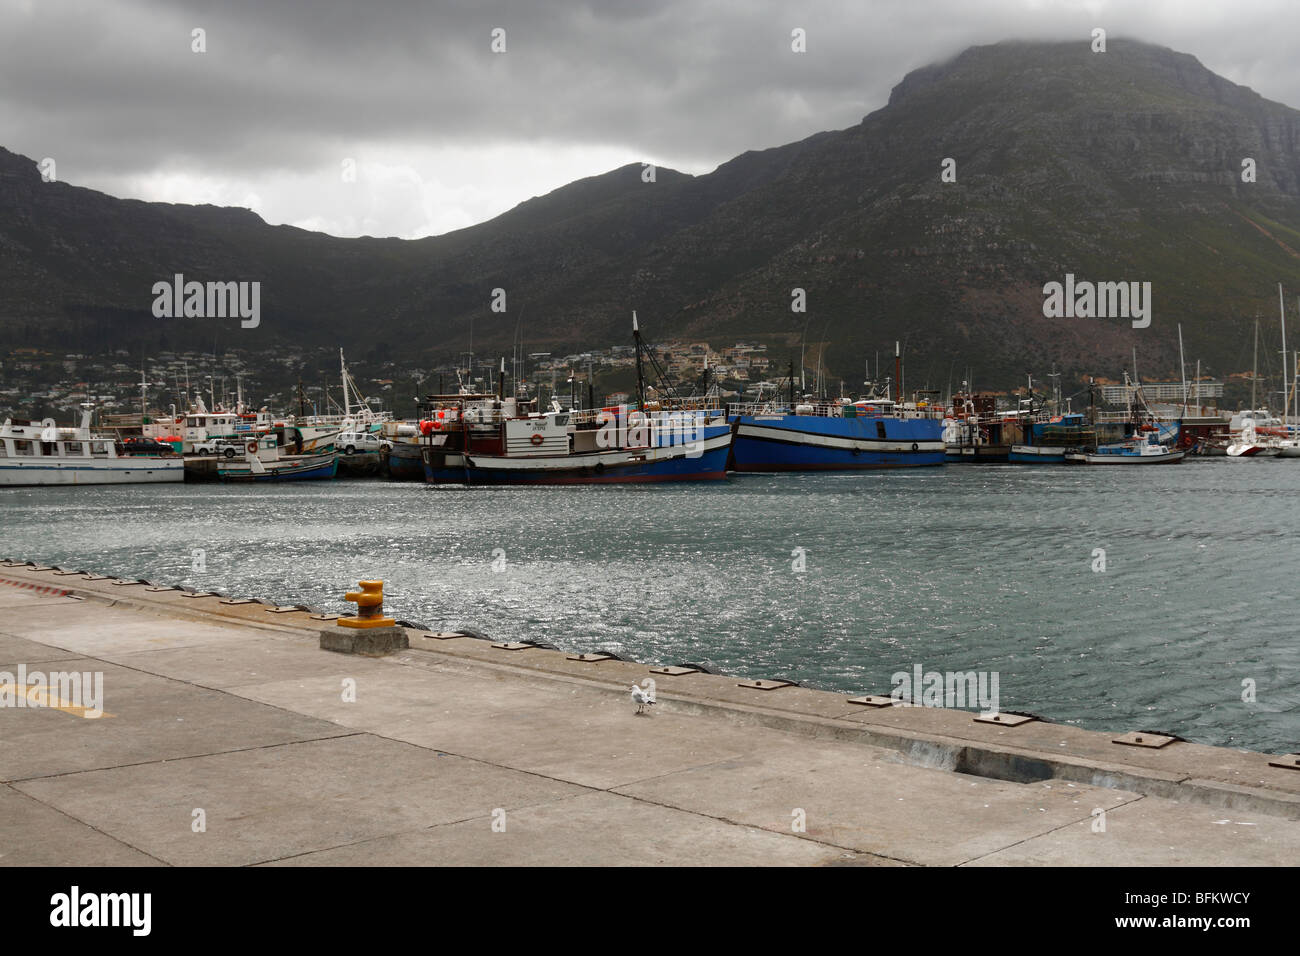 Fisherman's Boats at Hout Bay, West Cape, South Africa, November 2009 Stock Photo